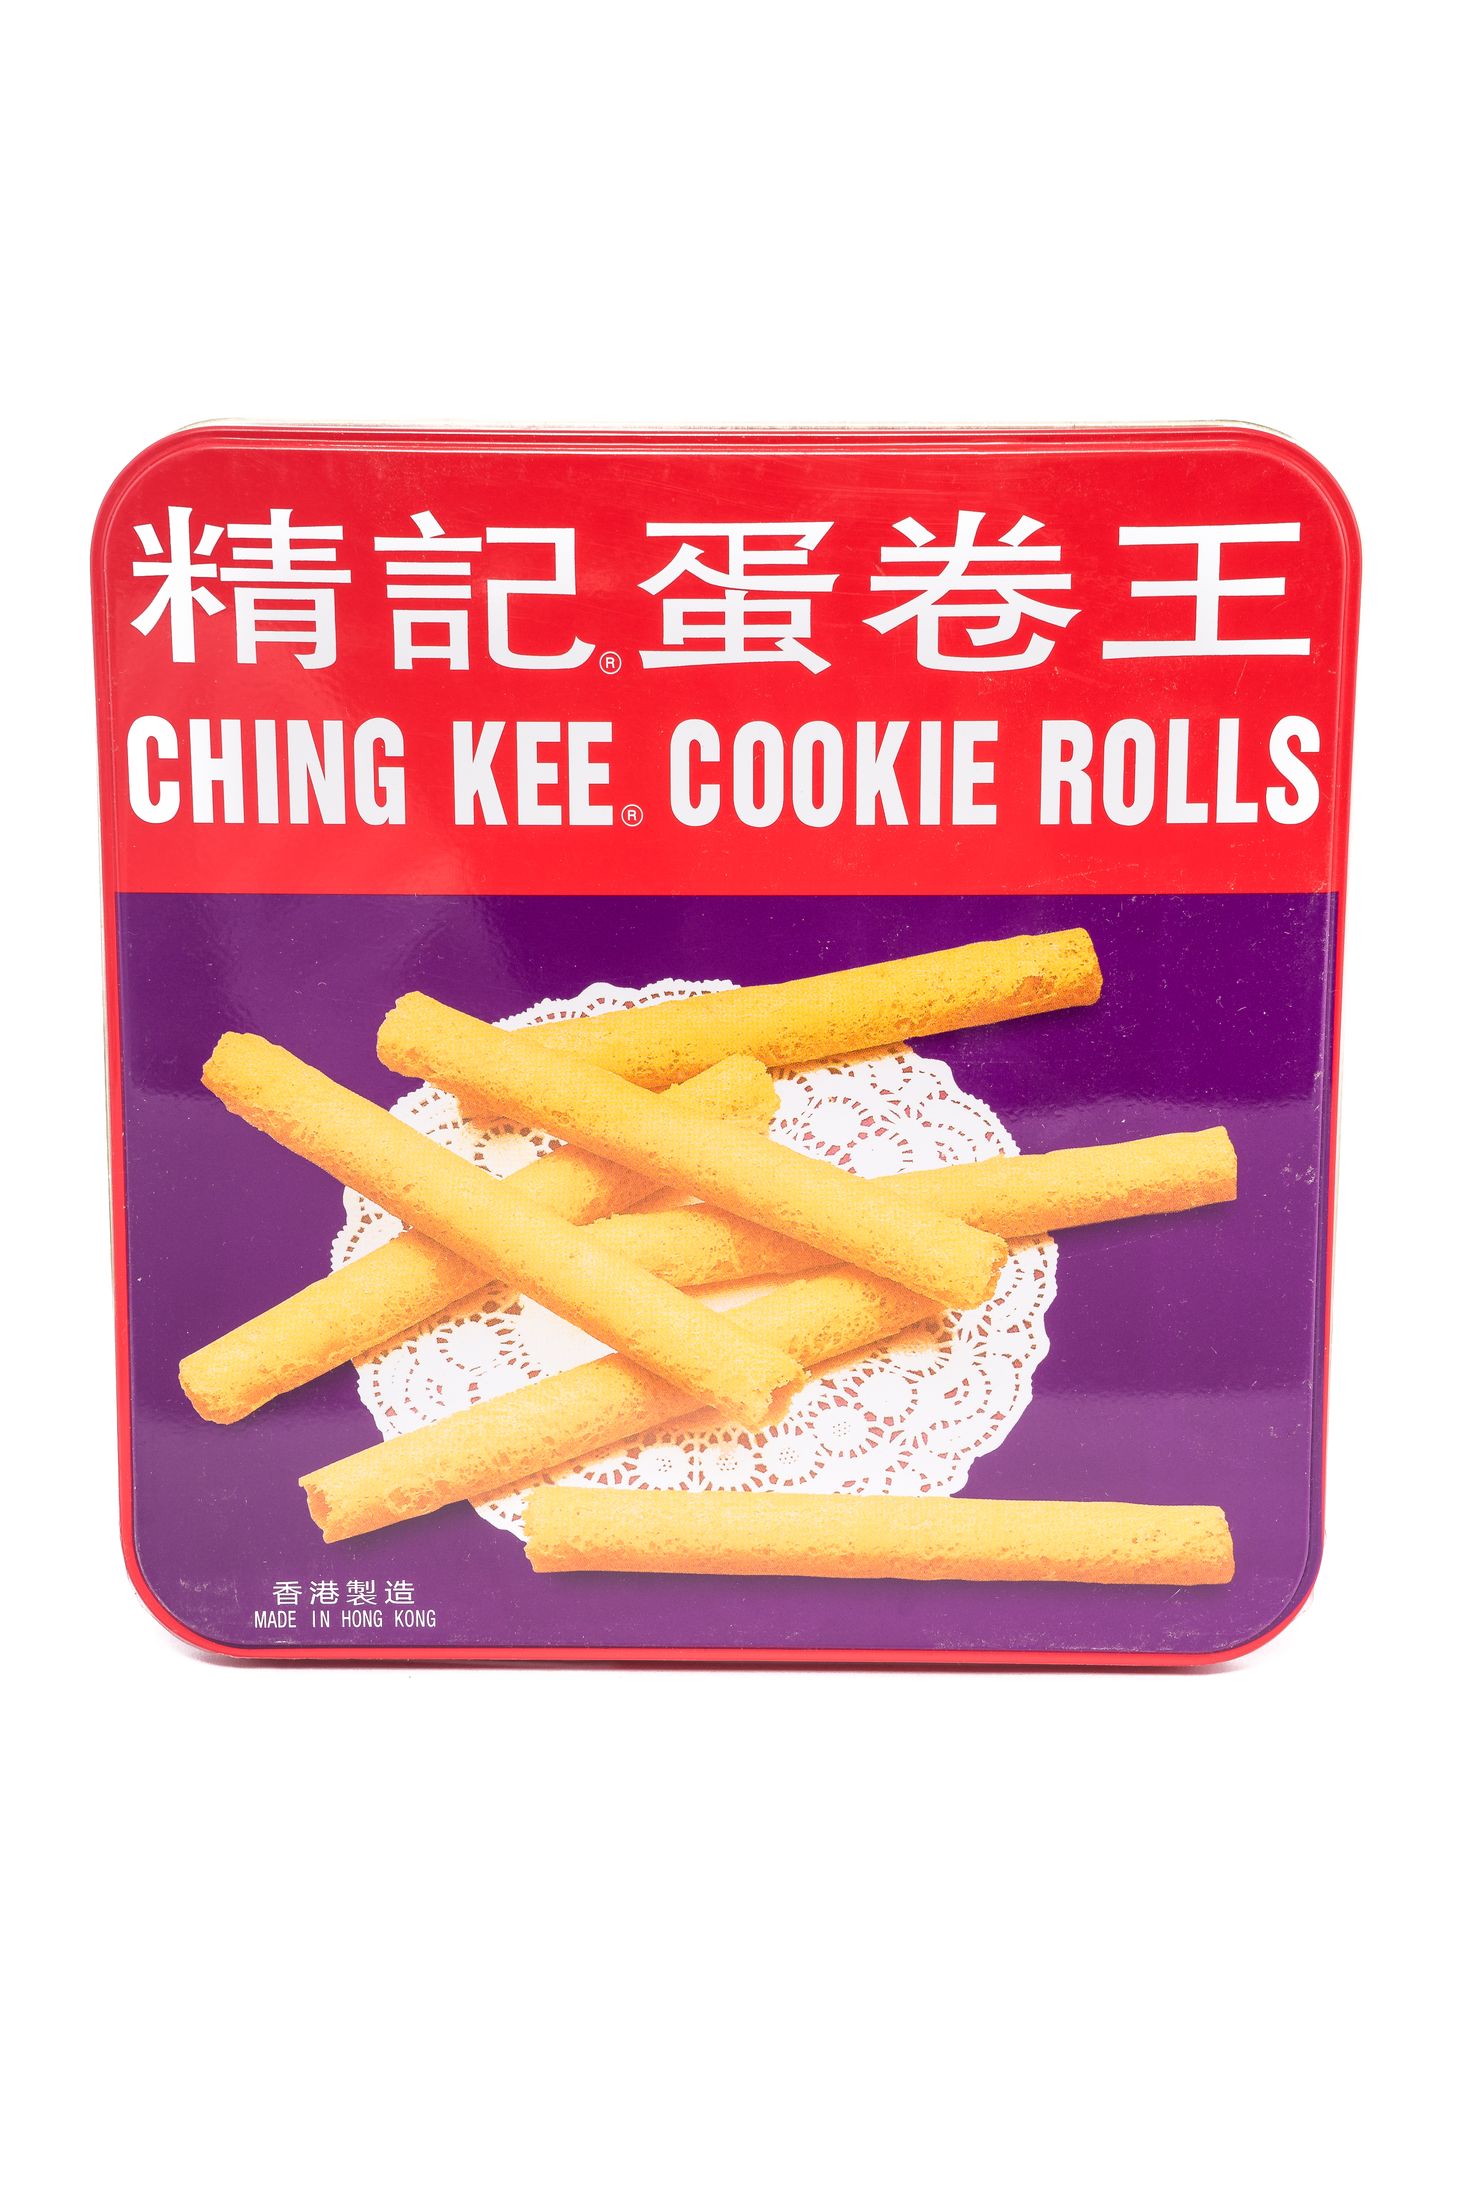 Ching Kee Cookie rolls